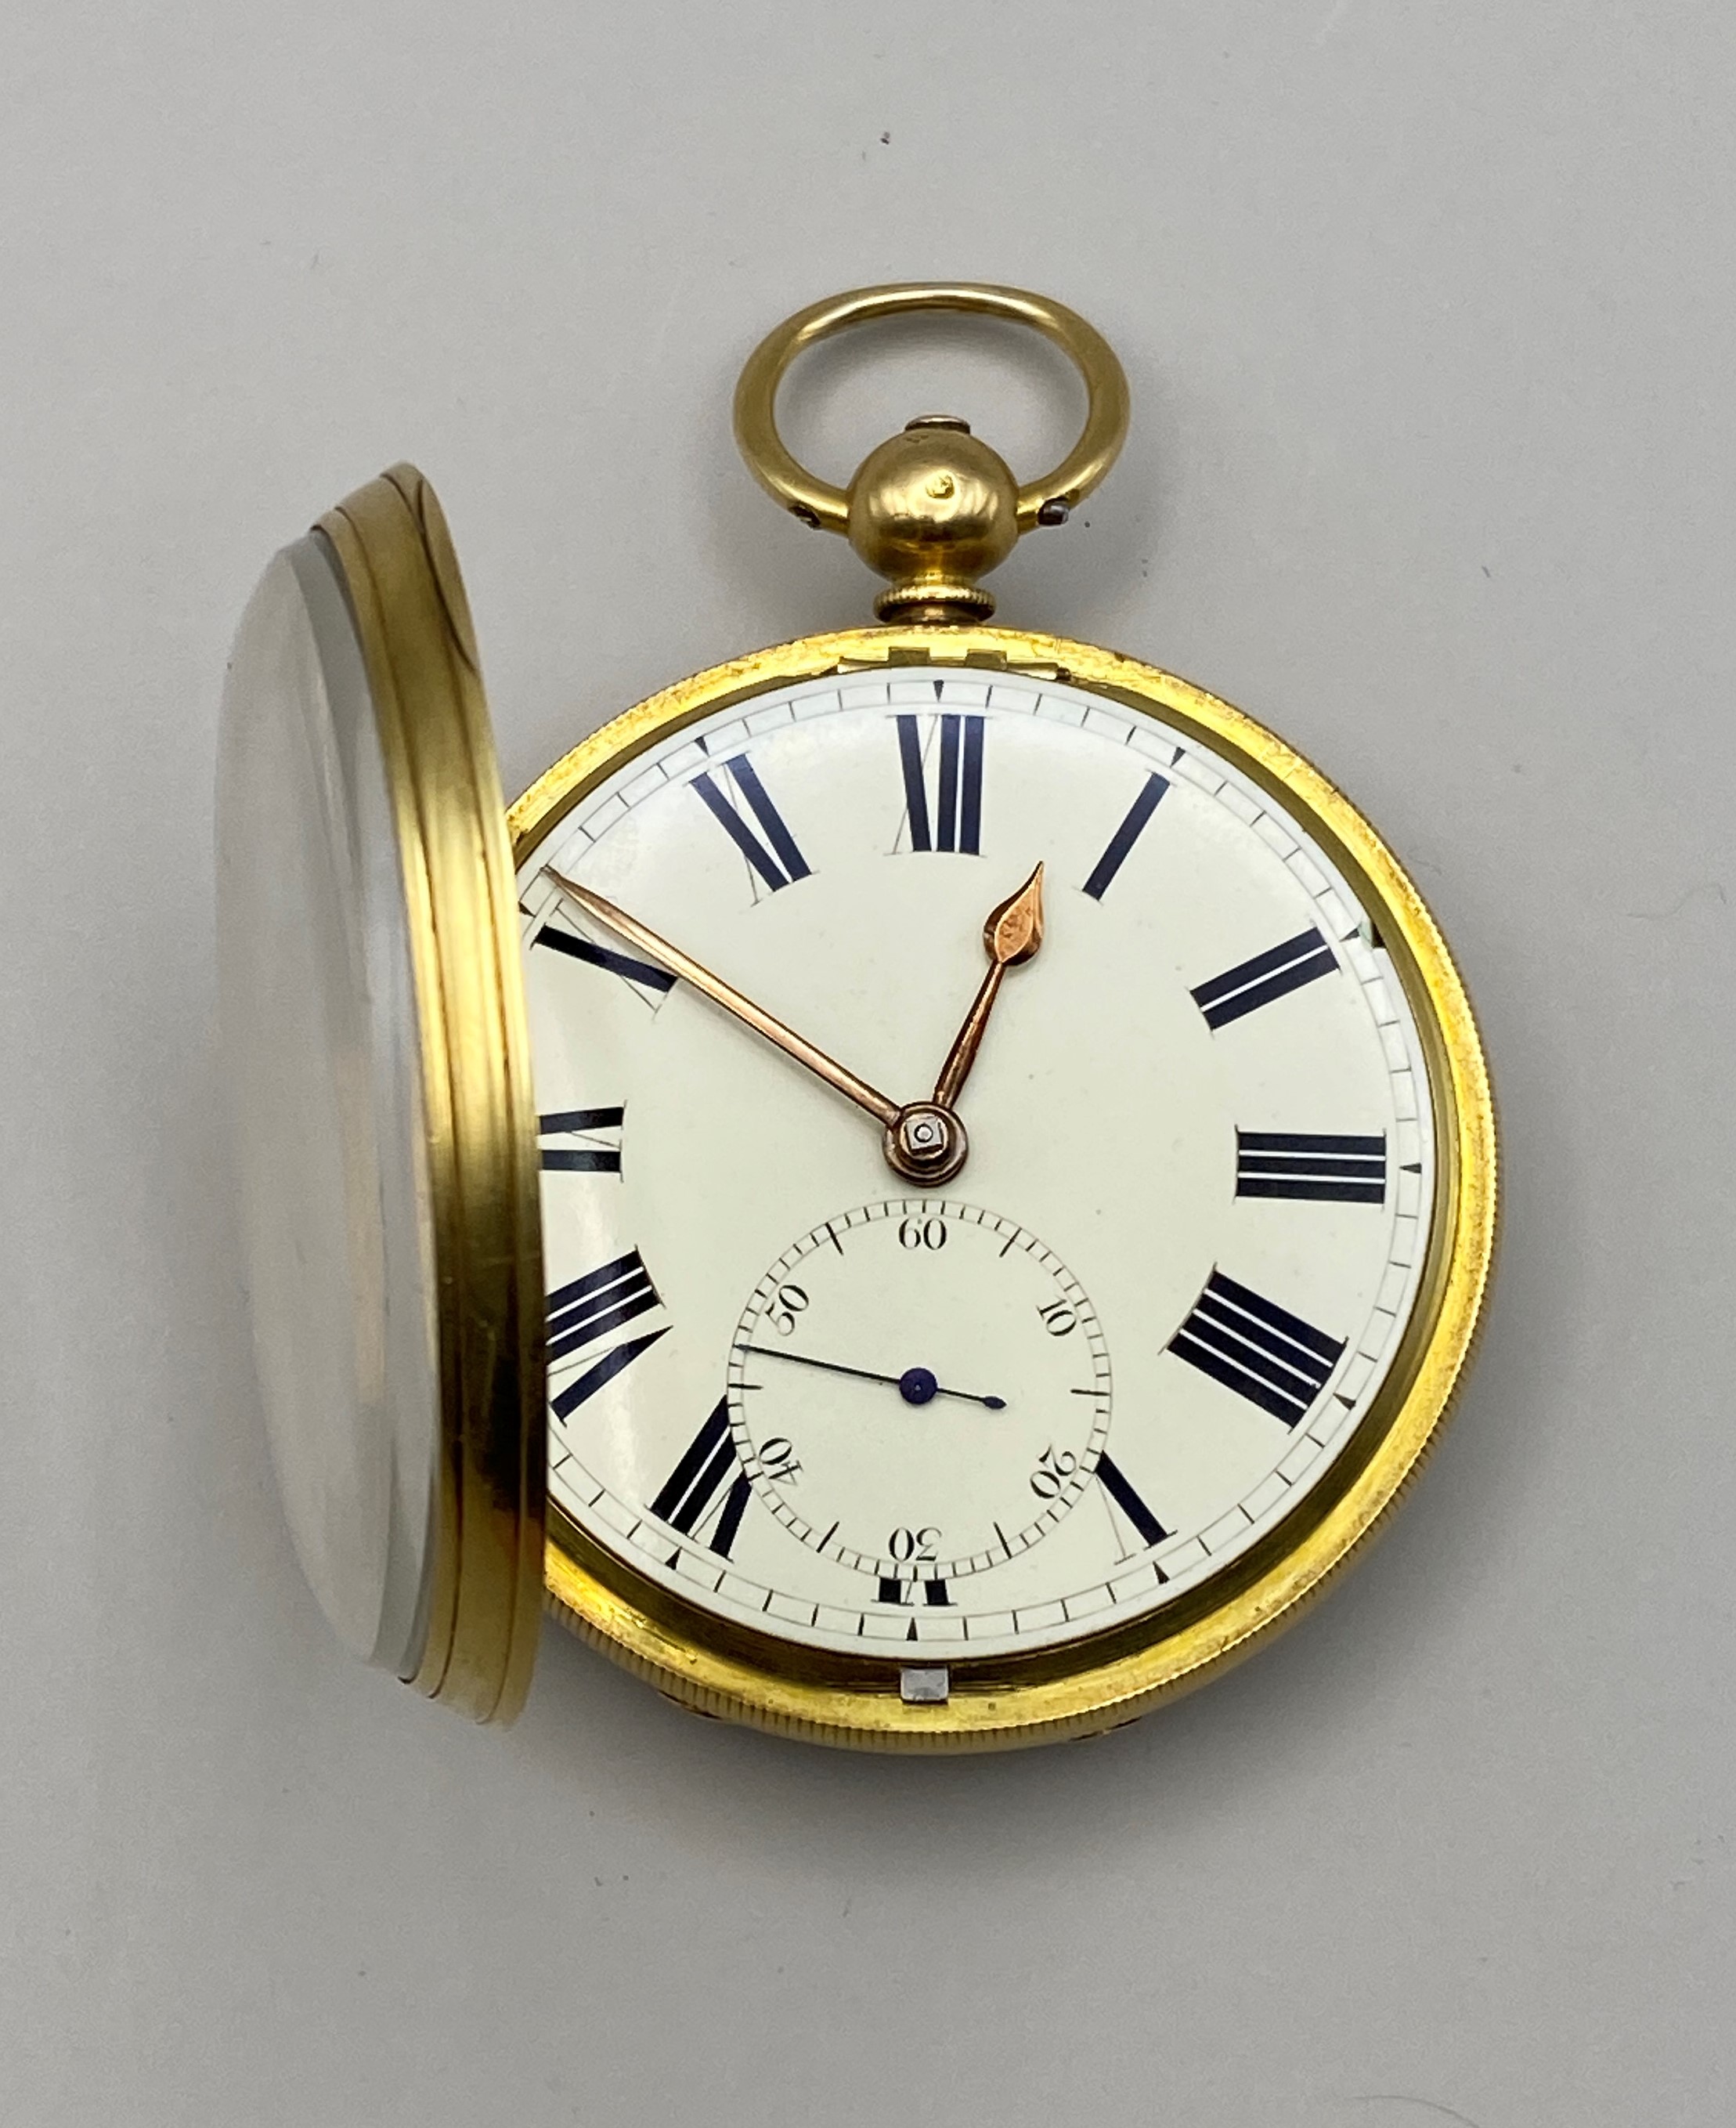 18ct Gold Fusee Pocket Watch by Gammon of Birmingham '1685', No.3584. - Image 8 of 48